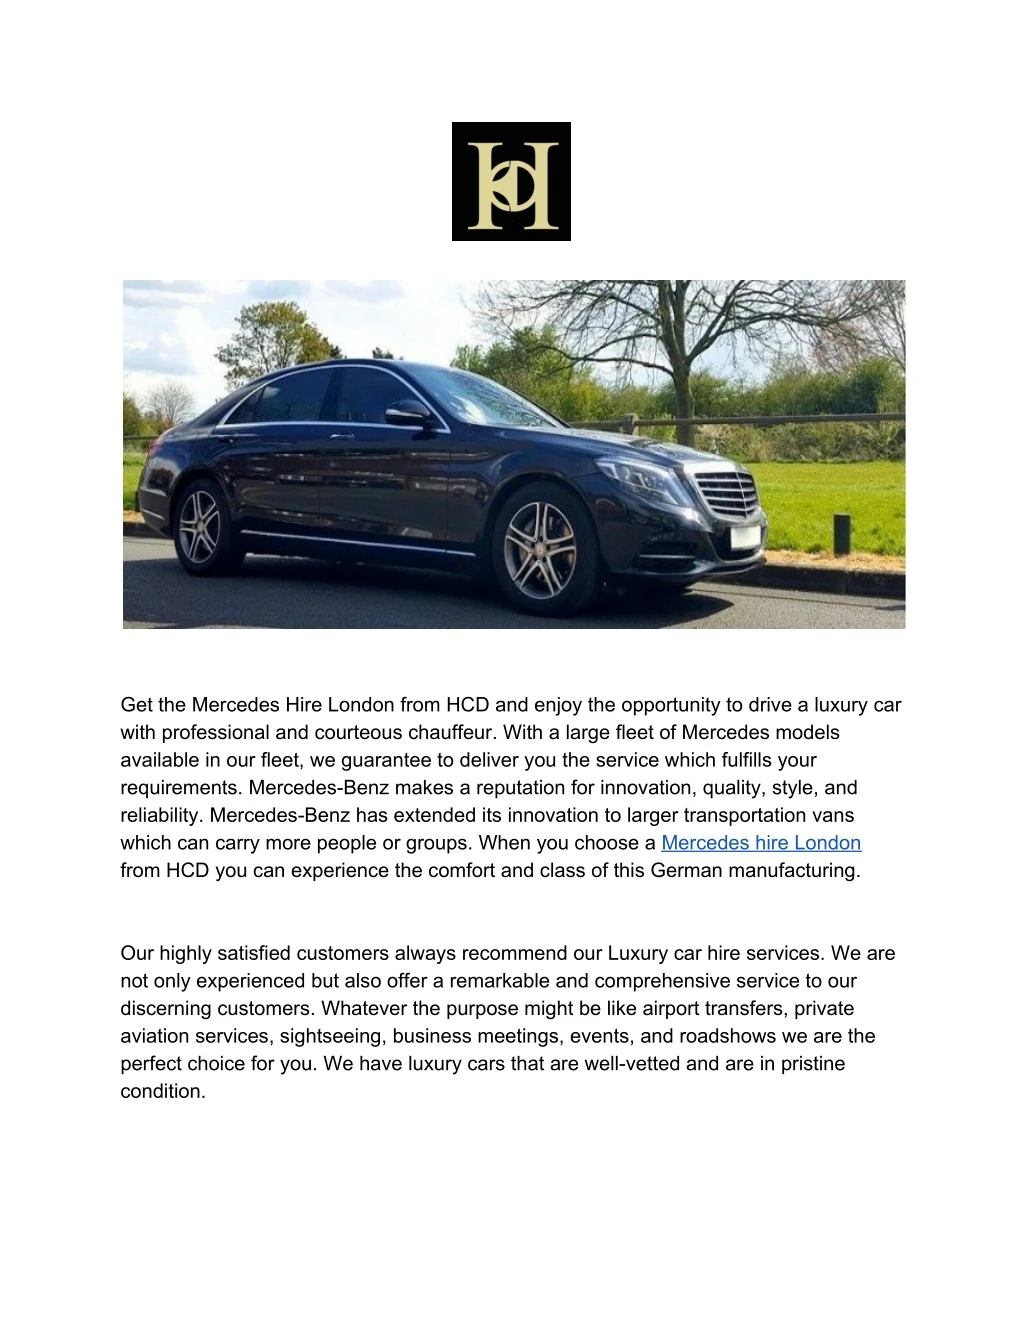 get the mercedes hire london from hcd and enjoy